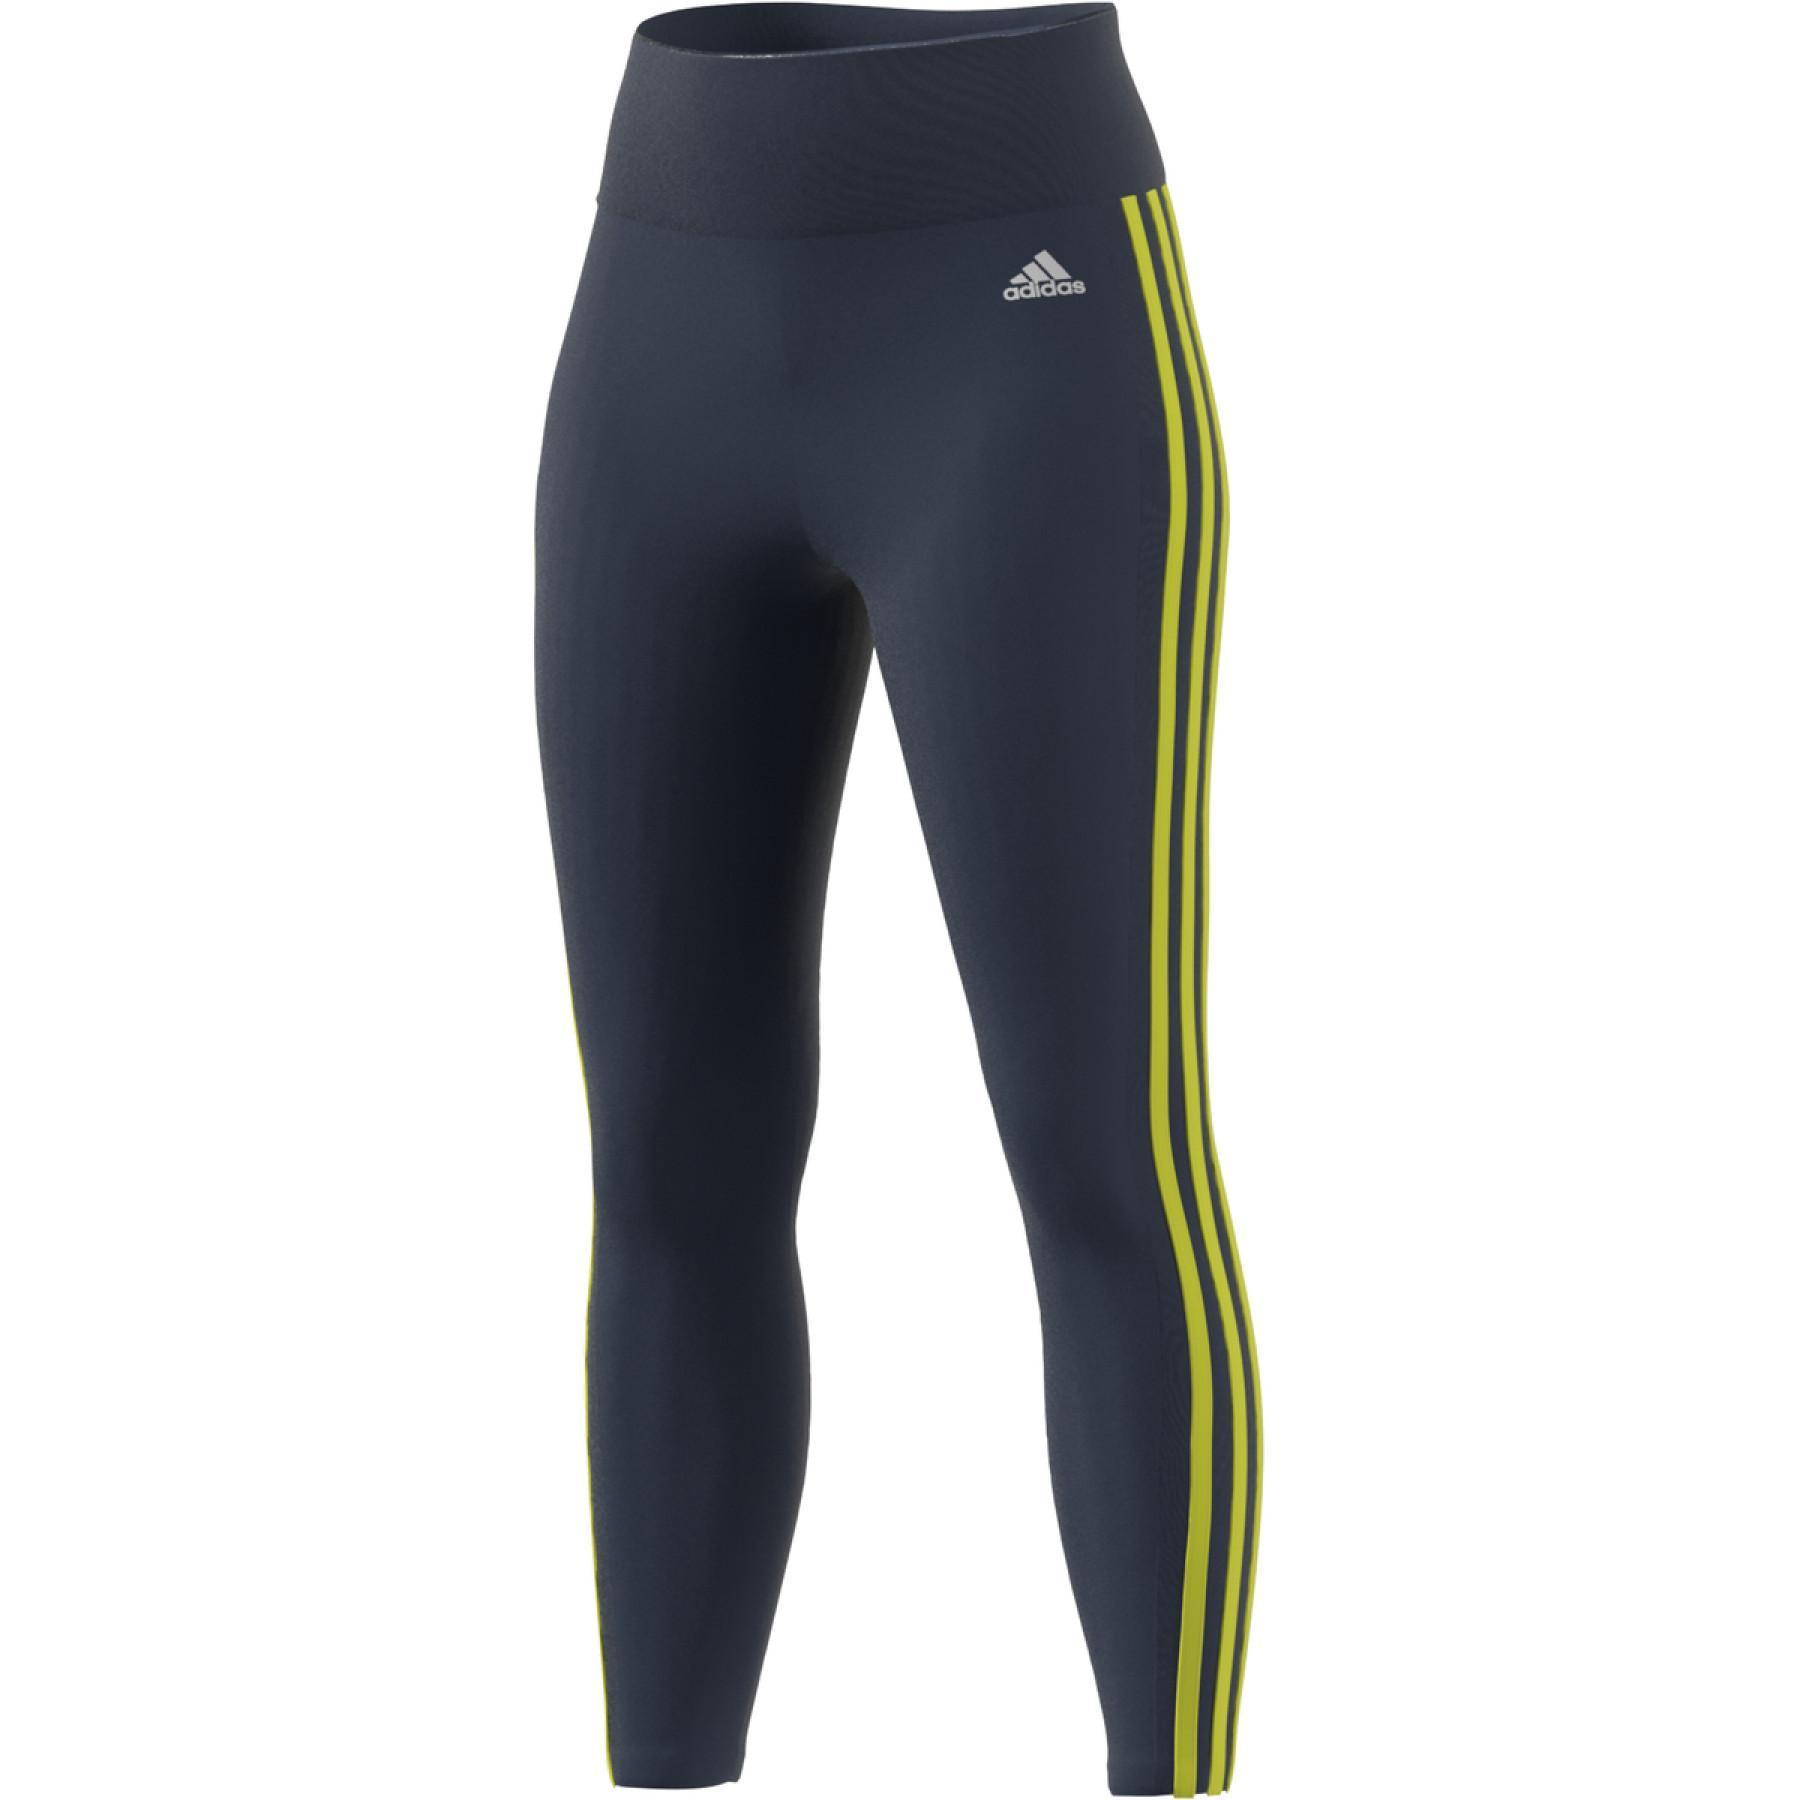 Women's high-waisted leggings adidas Designed To Move 3-Bandes 7/8 Sport